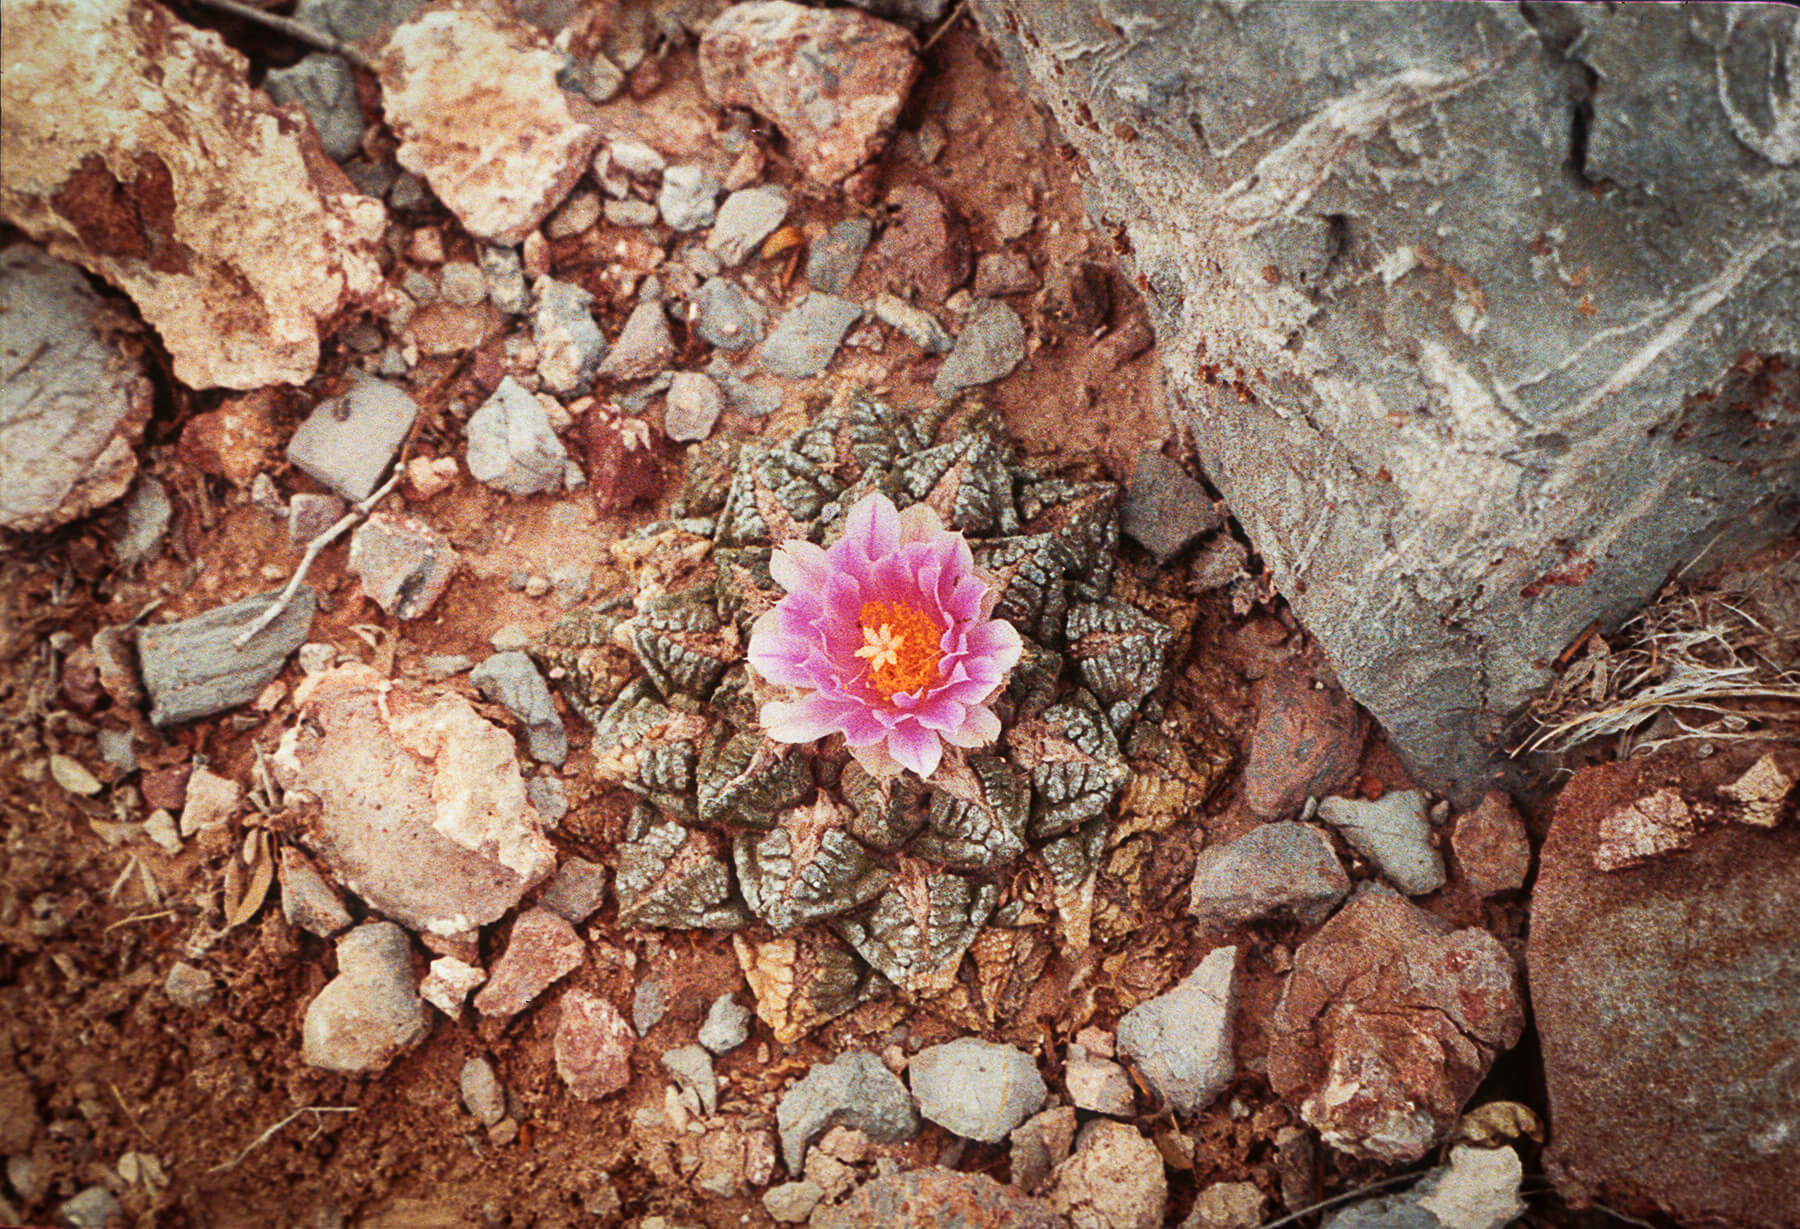 A bright pink living rock cactus